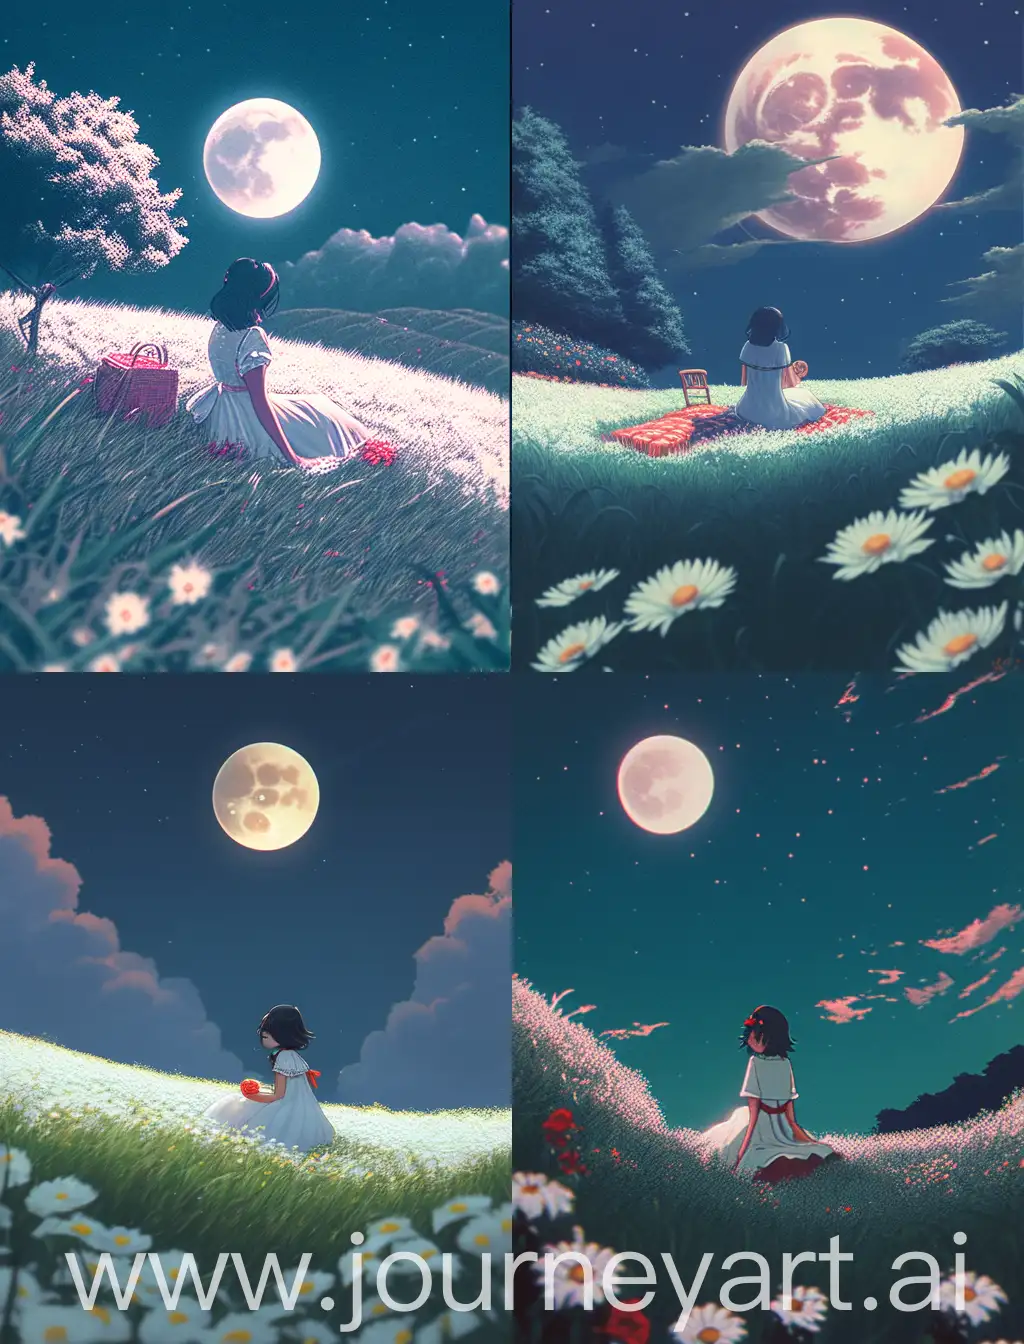 a curly black hair, white girl wearing white dress on a grass hill with Chamomiles sitting on Red and white checkered pattern picnic cloth watching moon on skies, dark night, moonlight,  cinematic, animation style